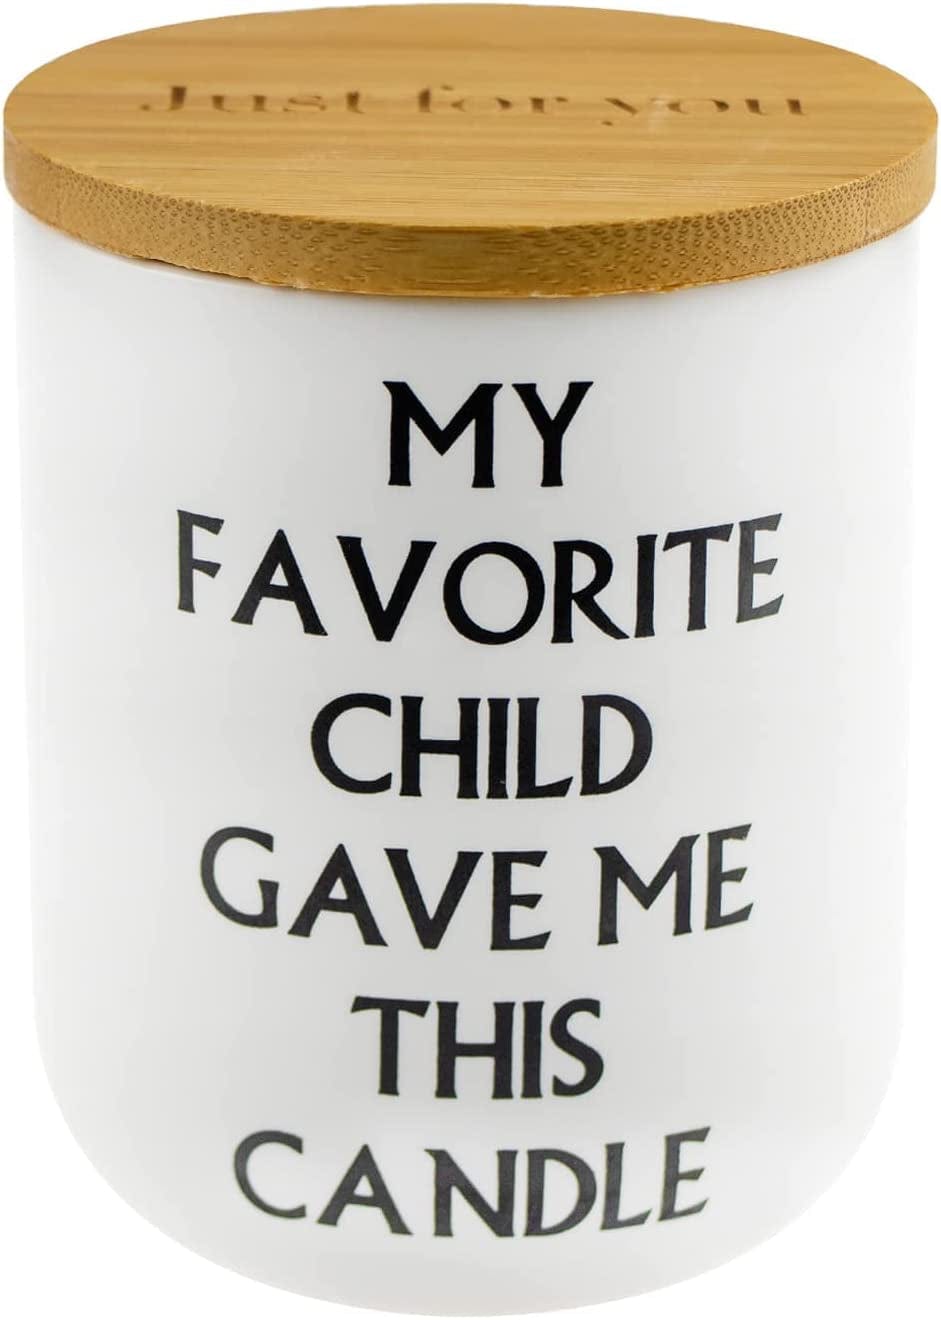 GeckoCustom Mothers Day Gifts for Mom from Daughter Son- Best Mom & Dad Gifts Ideas, Funny Mother'S Day, Fathers Day, Birthday, Thanksgiving, Christmas Gifts, Vanilla Coconut Candles(11.5Oz)